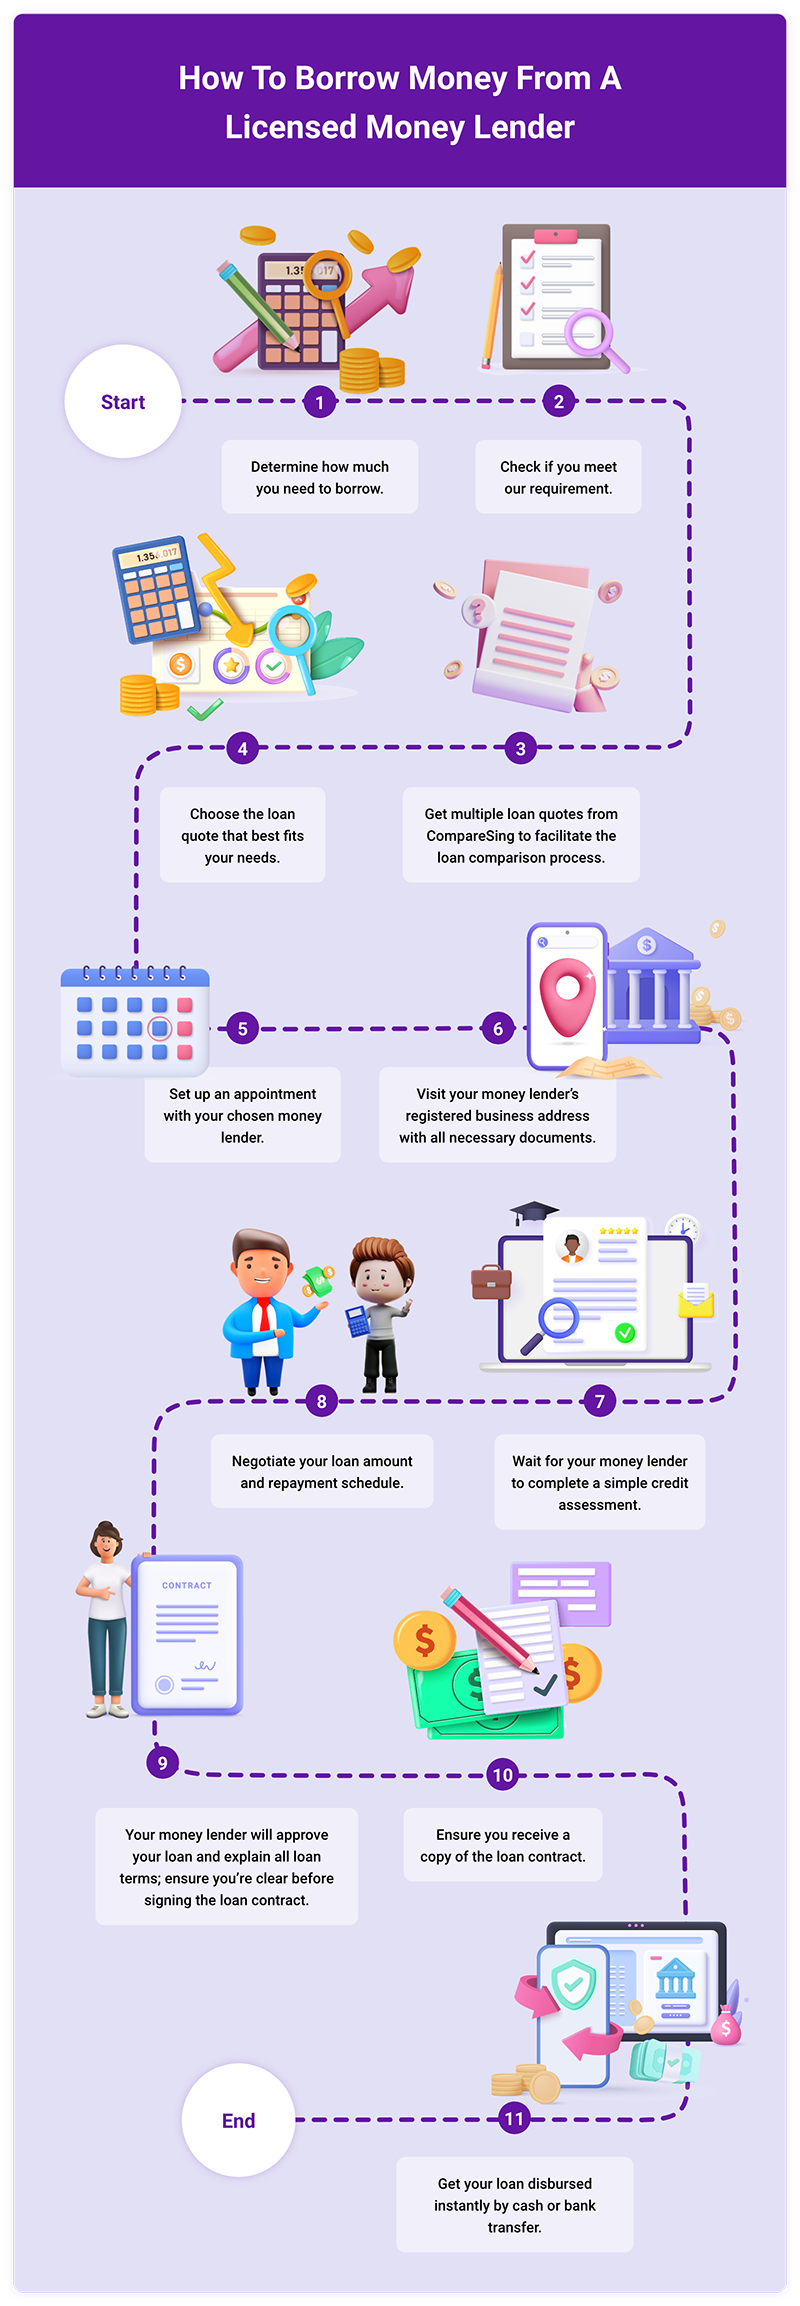 Infographic showing step-by-step instructions on how to borrow money from a licensed money lender